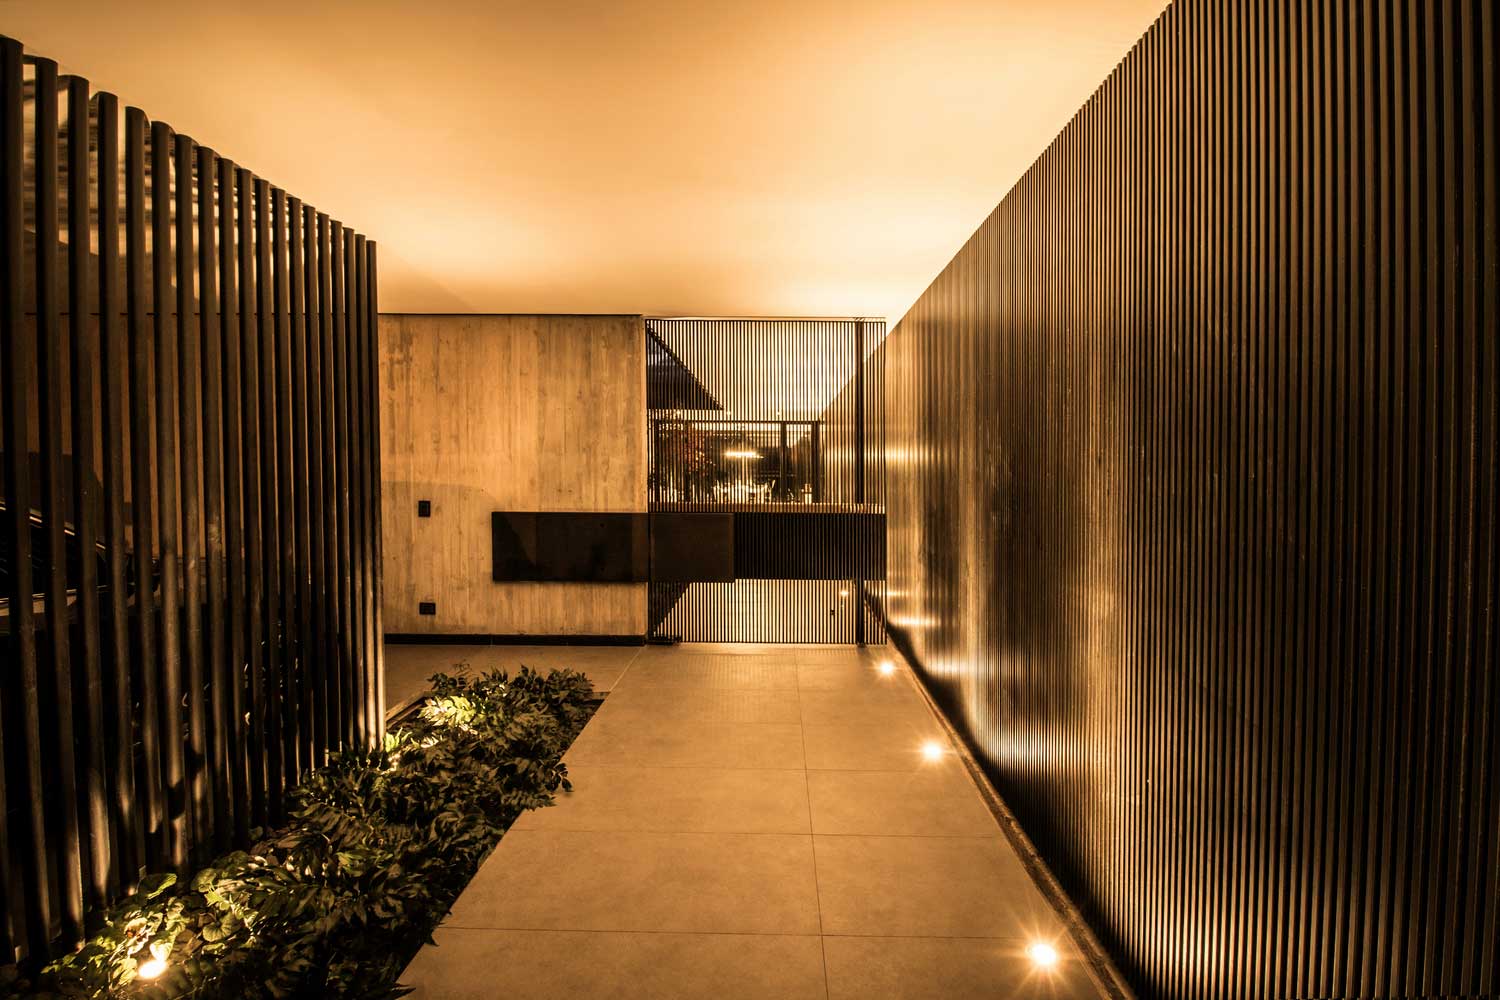 Futuristic Wooden Cladding For Exterior Walls As An Element